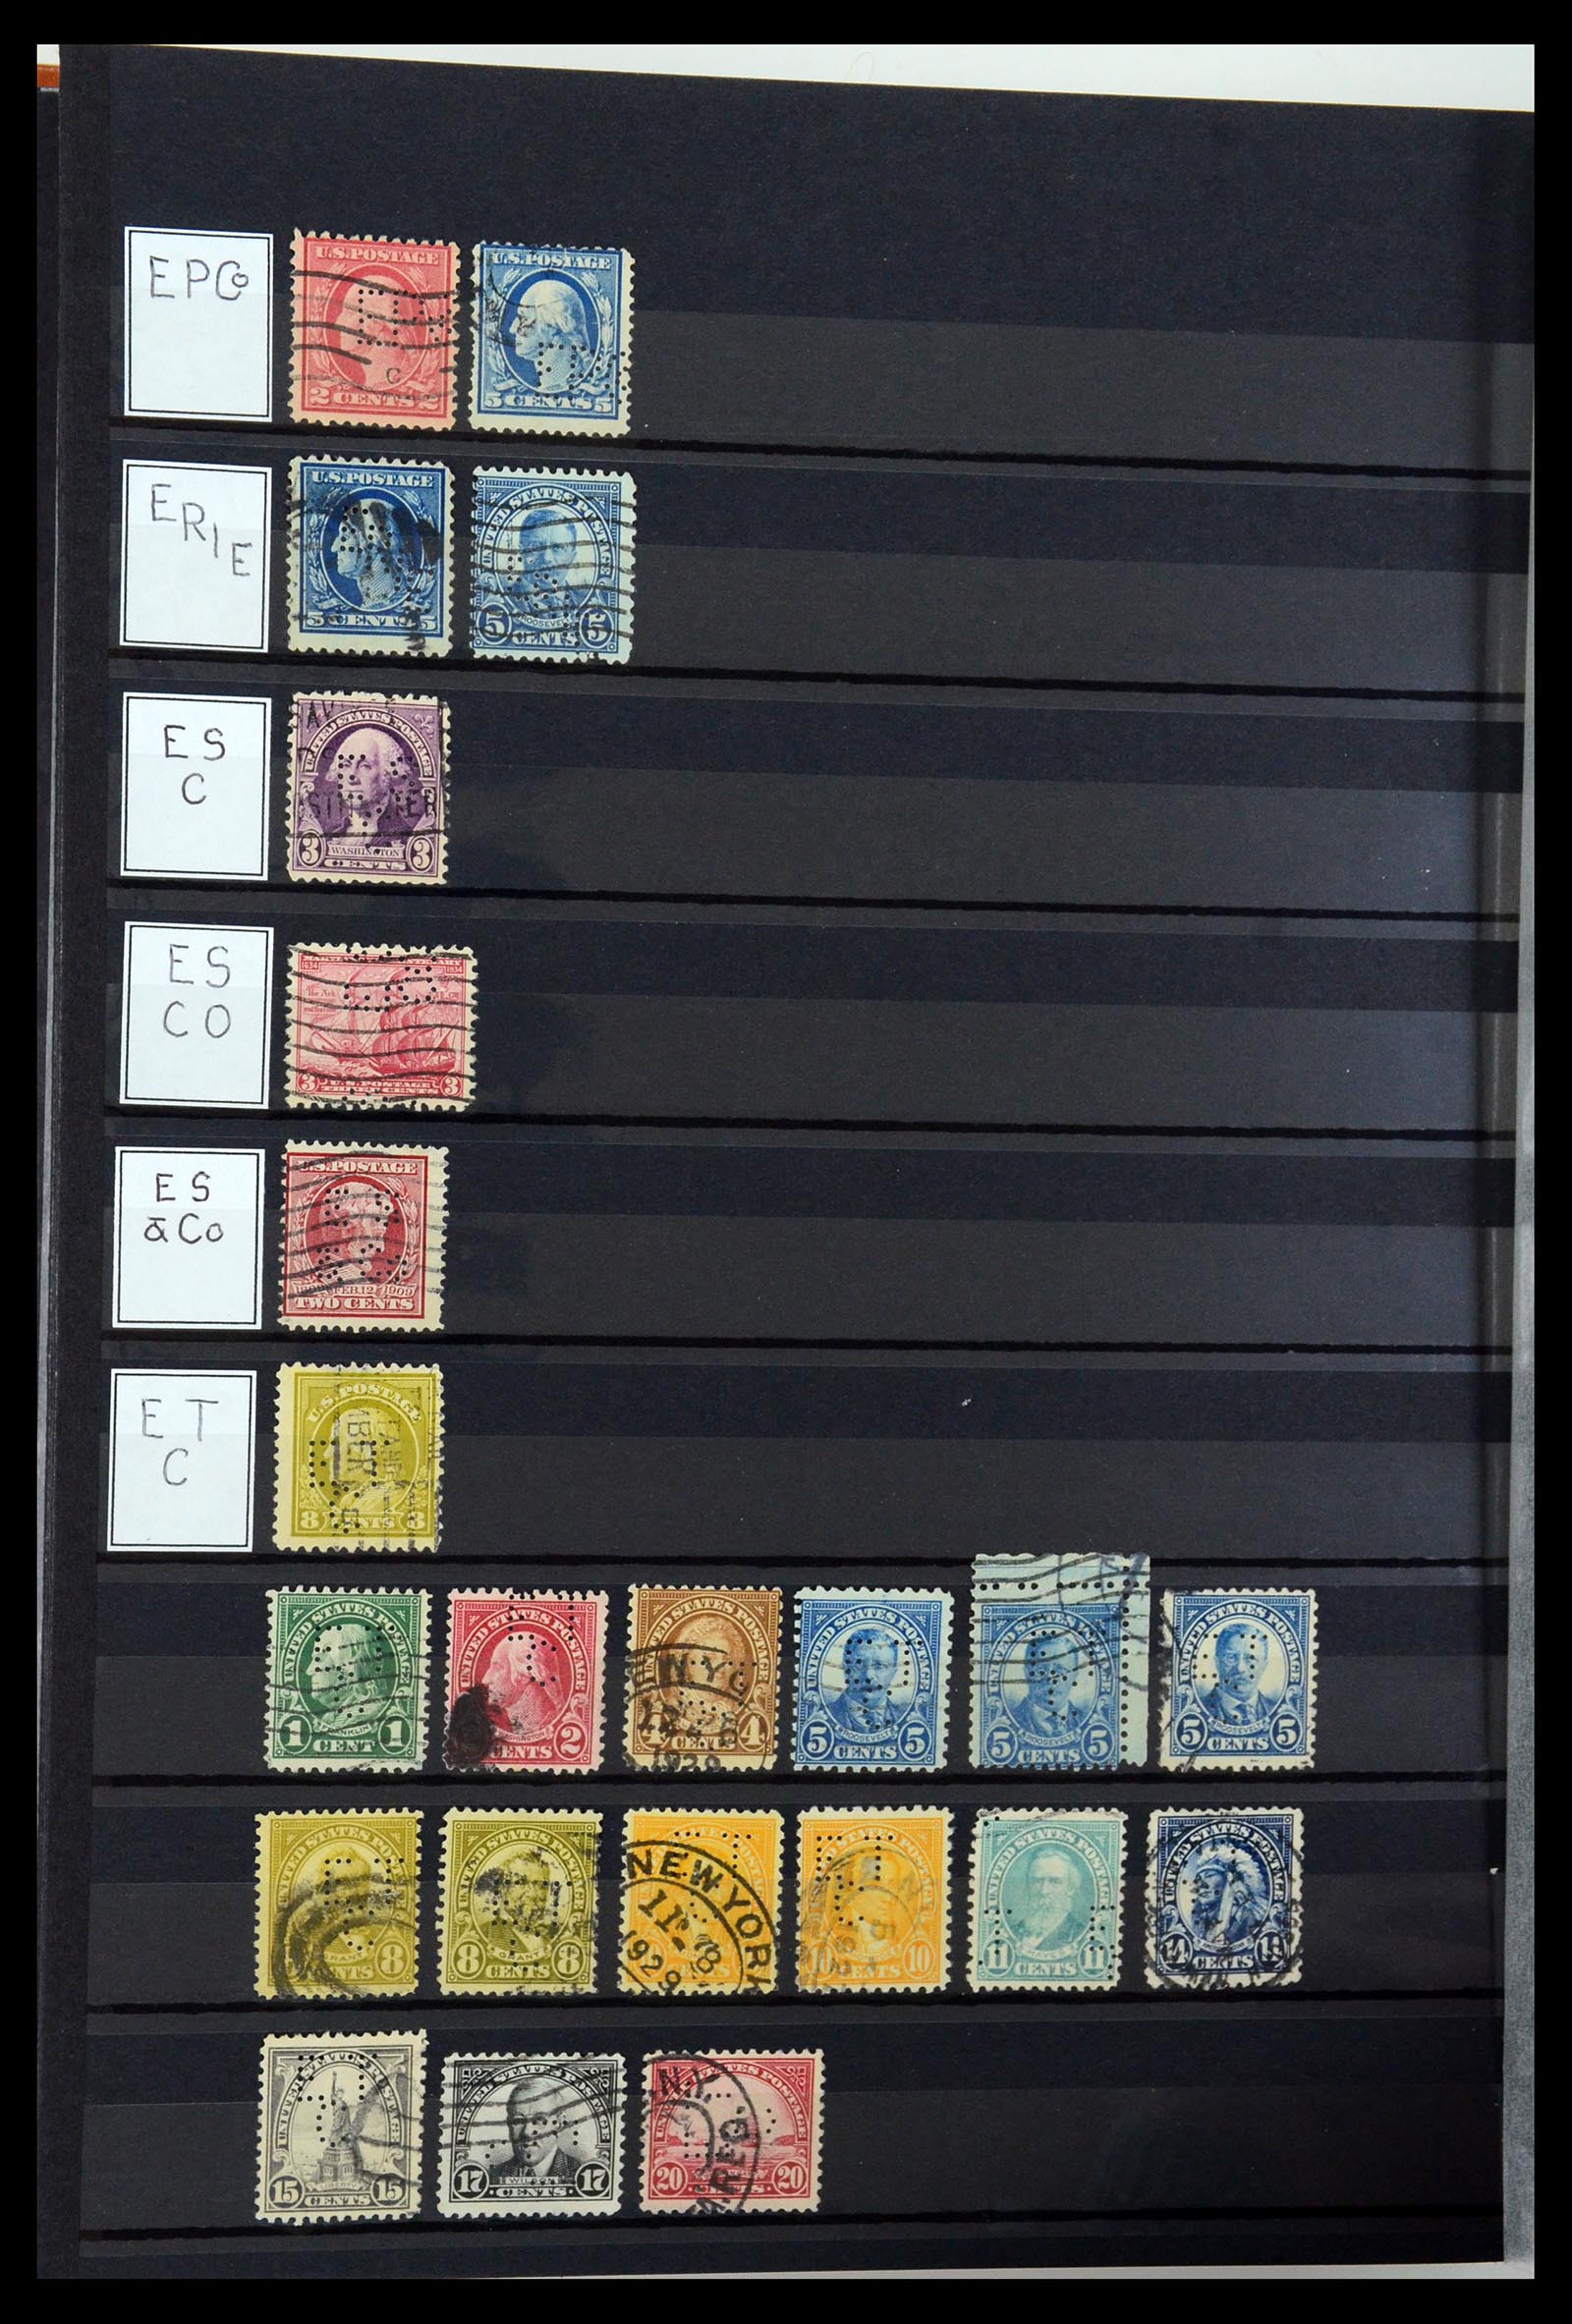 36388 042 - Stamp collection 36388 USA perfins.